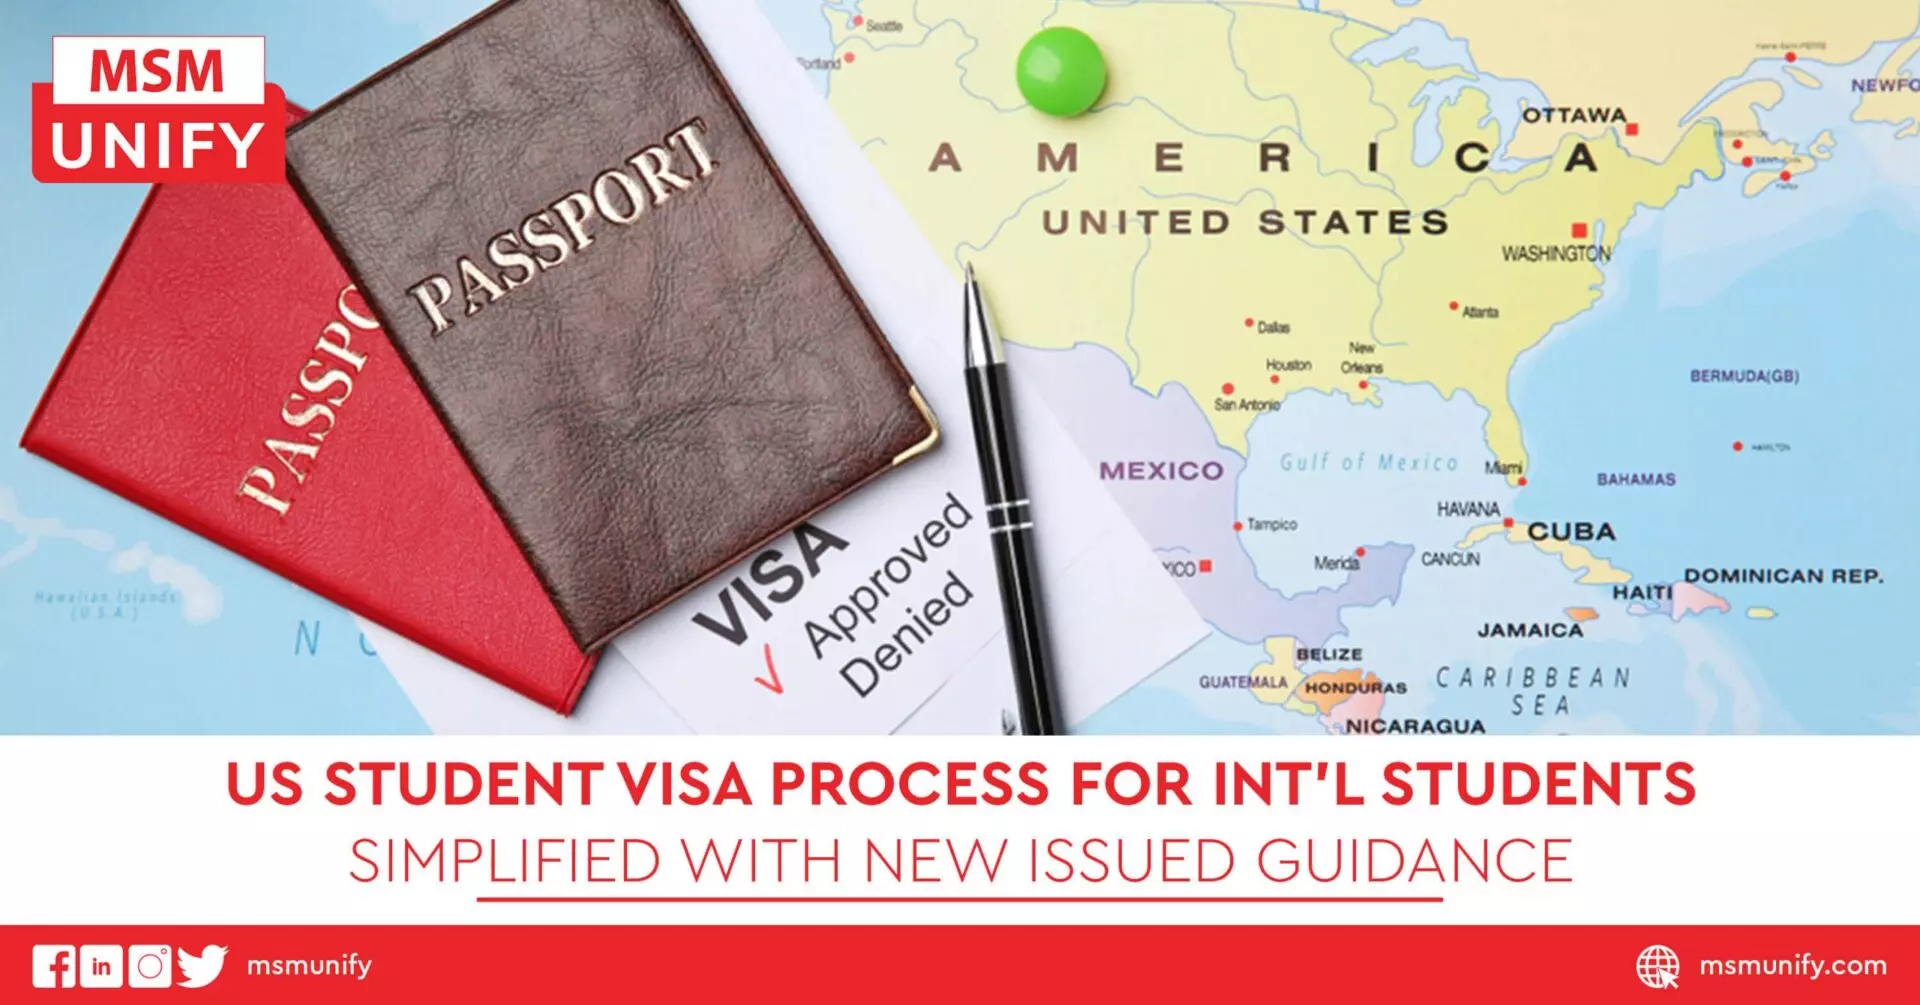 US Student Visa Process for Intl Students Simplified With New Issued Guidance scaled 1